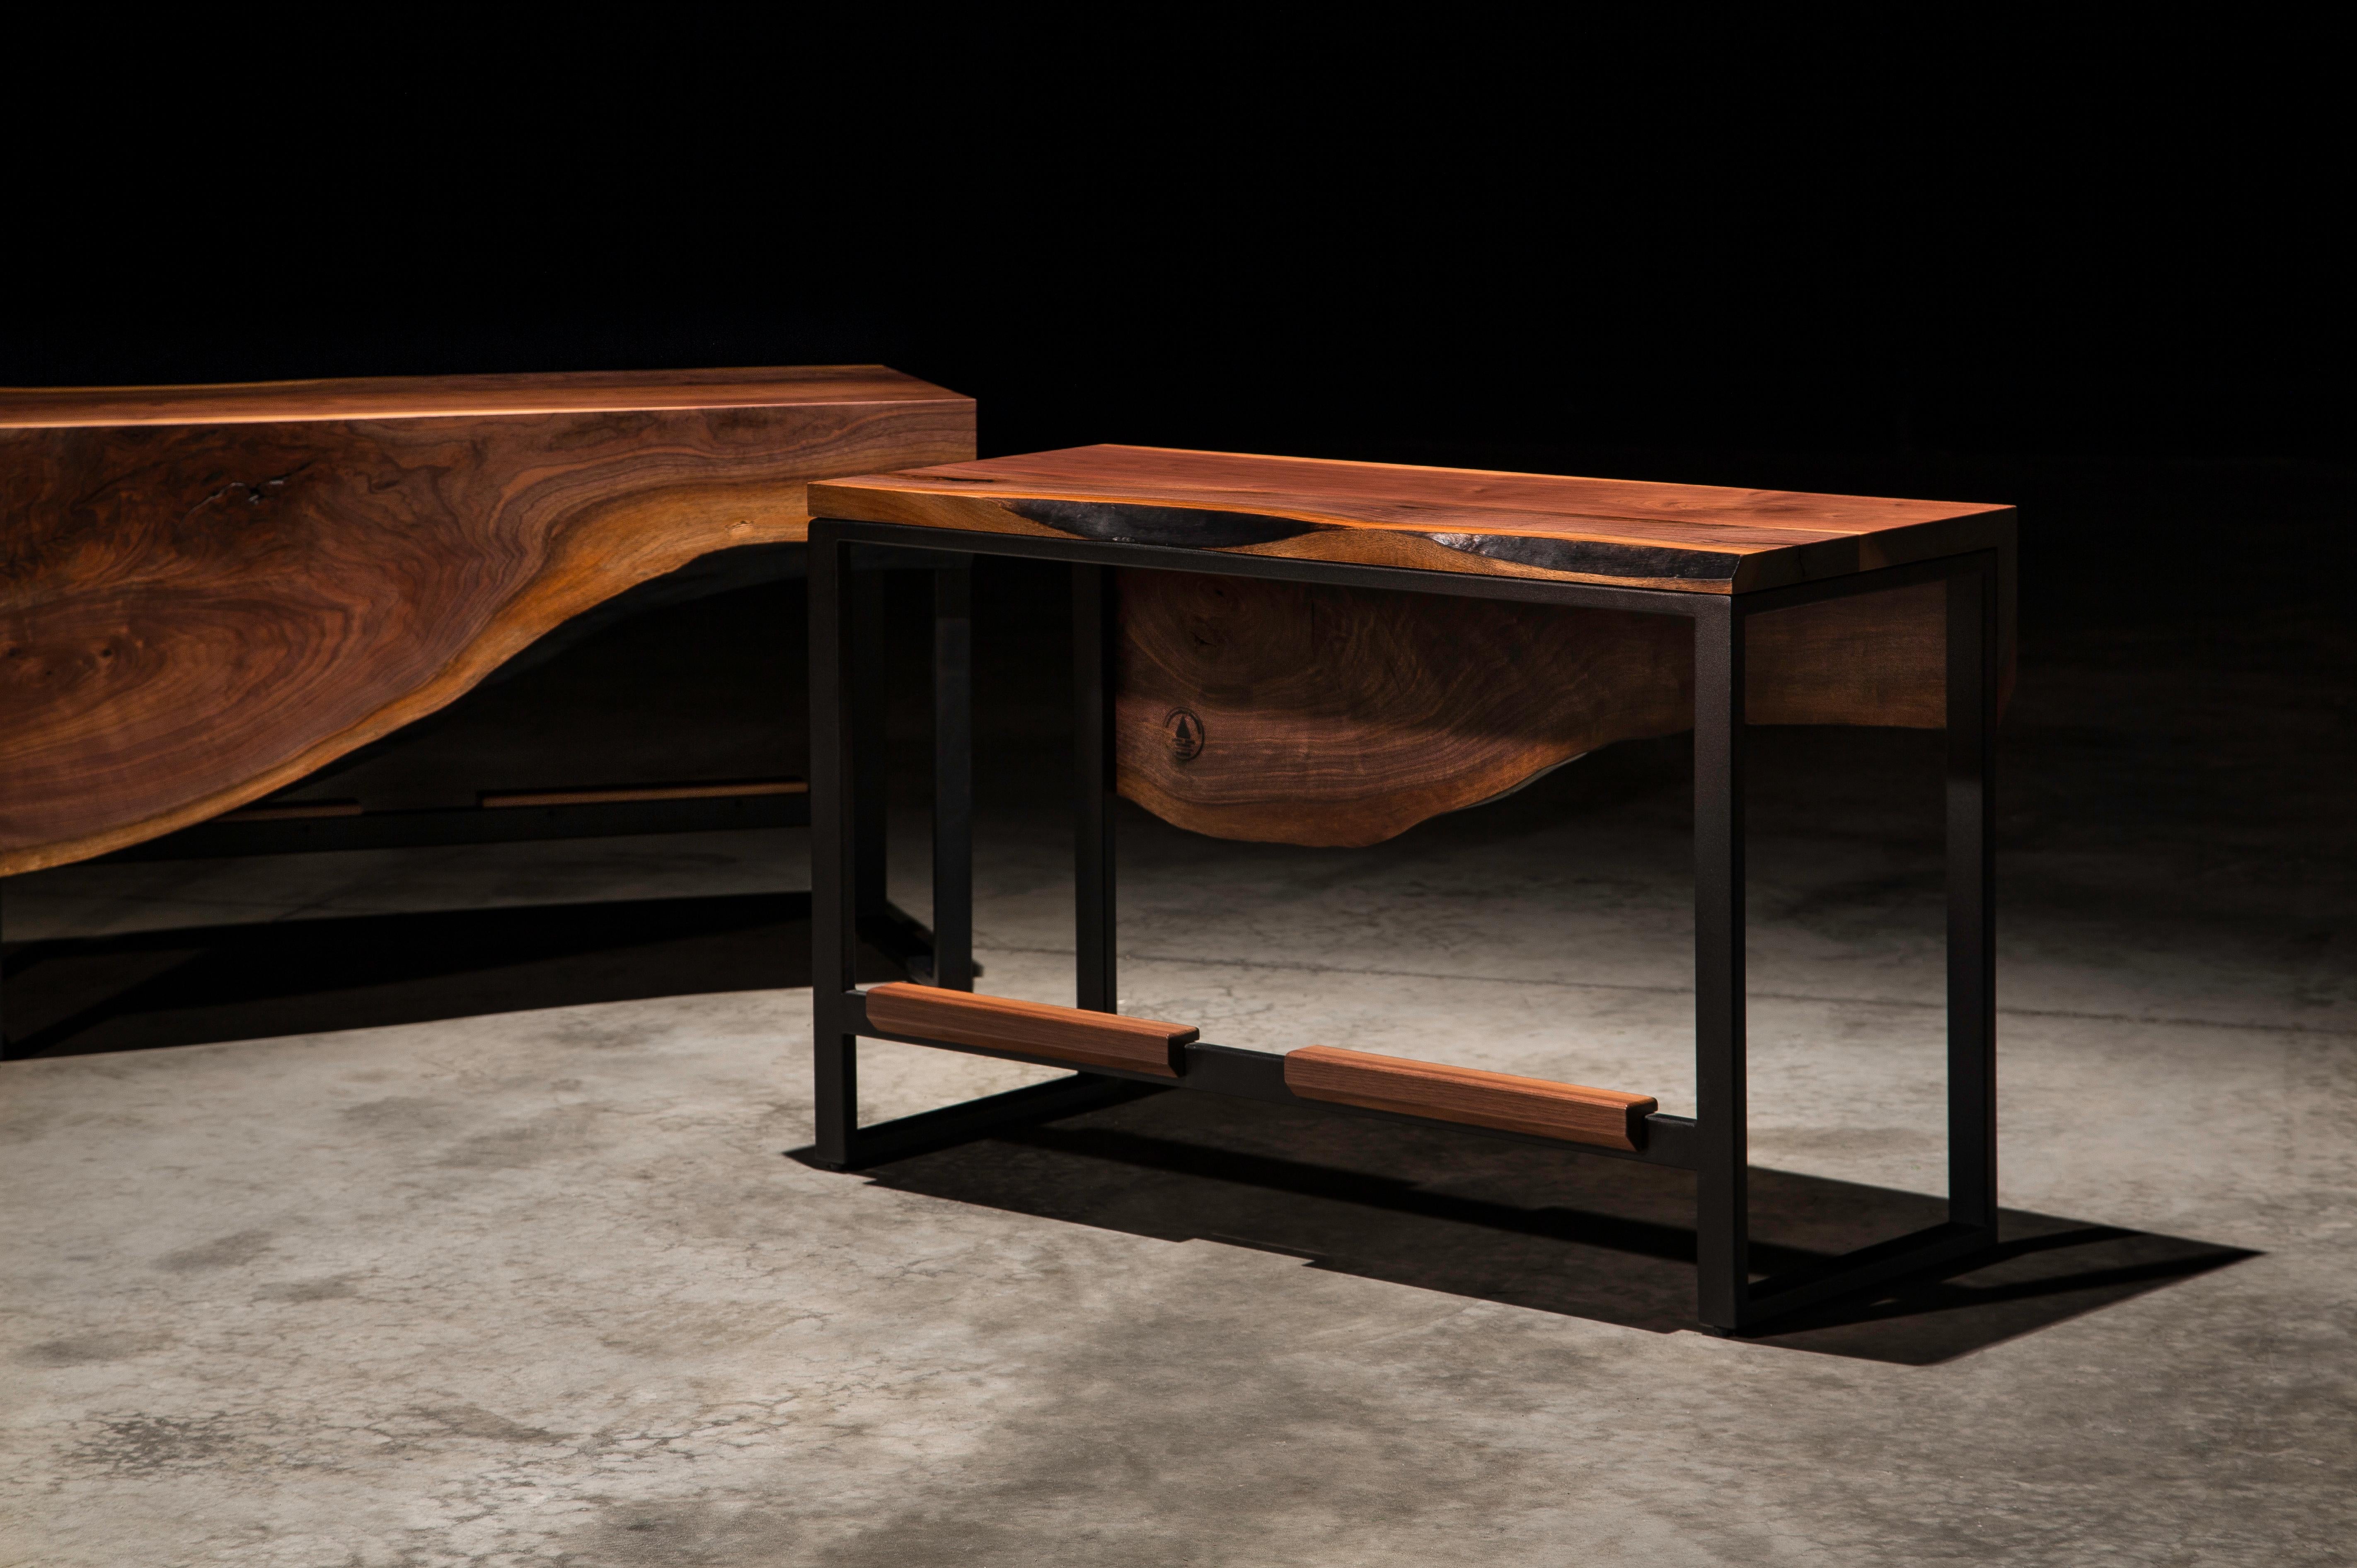 Using live edge walnut slabs and blackened steel bases, the Wabash benches have a modern style while emphasizing the natural beauty of the walnut. Using a mitered edge, the Wabash benches also have a waterfall effect. Pricing is per each